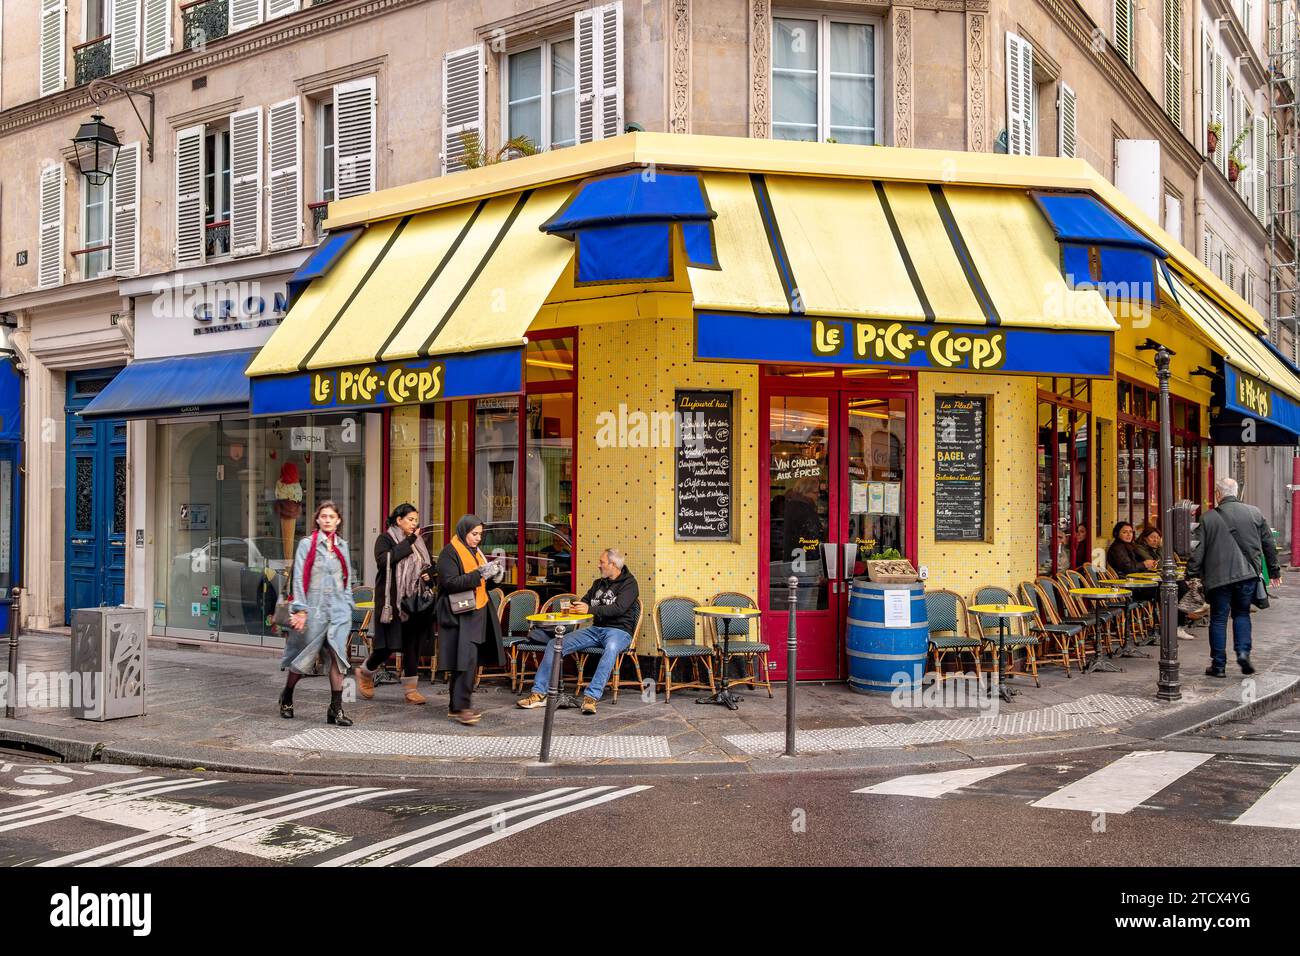 People sitting outside Le Pick Clops a bar ,cafe in the Marais area of Paris, France Stock Photo